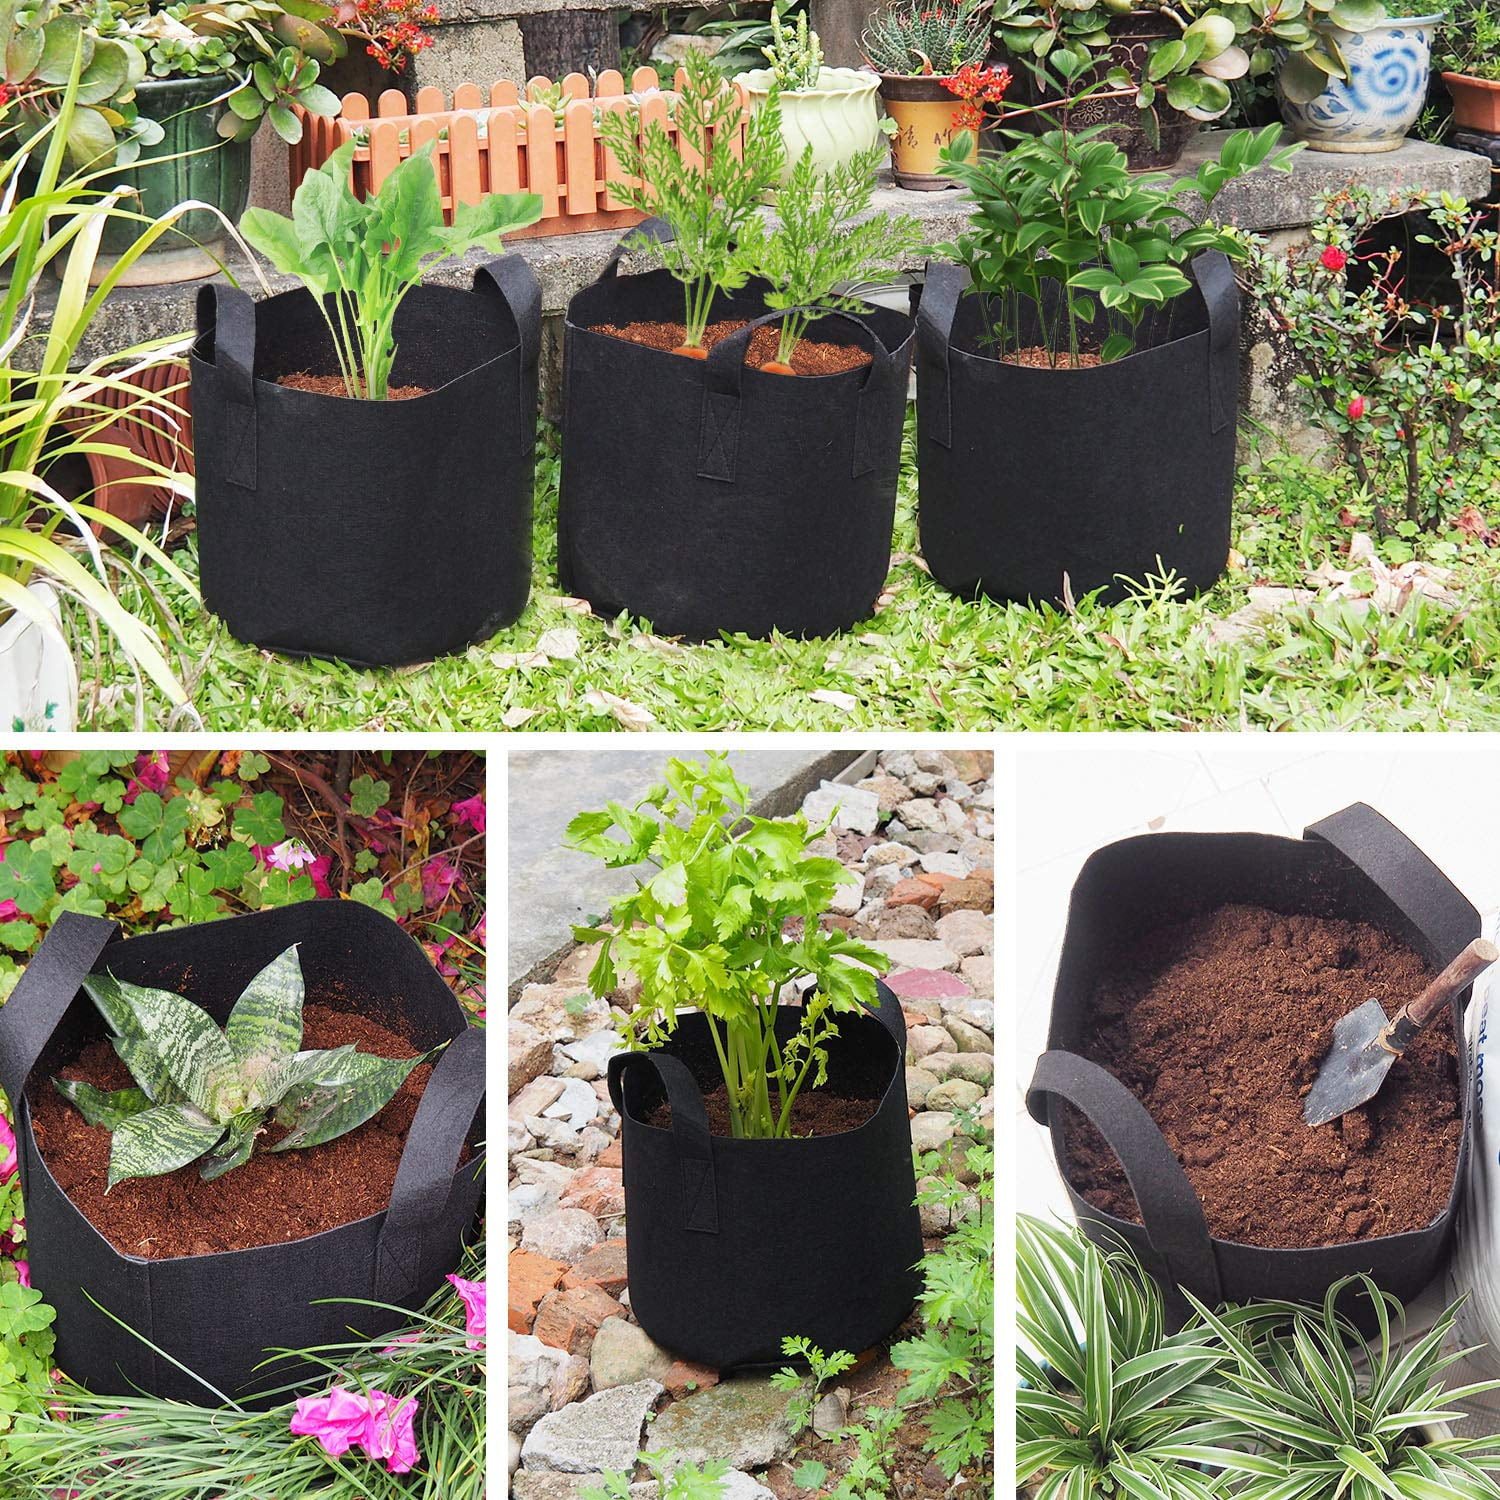 2 Gallon, Black TopoGrow 6-Pack 2 Gallon Grow Bags Black Fabric Round Aeration Pots Container for Nursery Garden and Planting Grow 6-Pack 